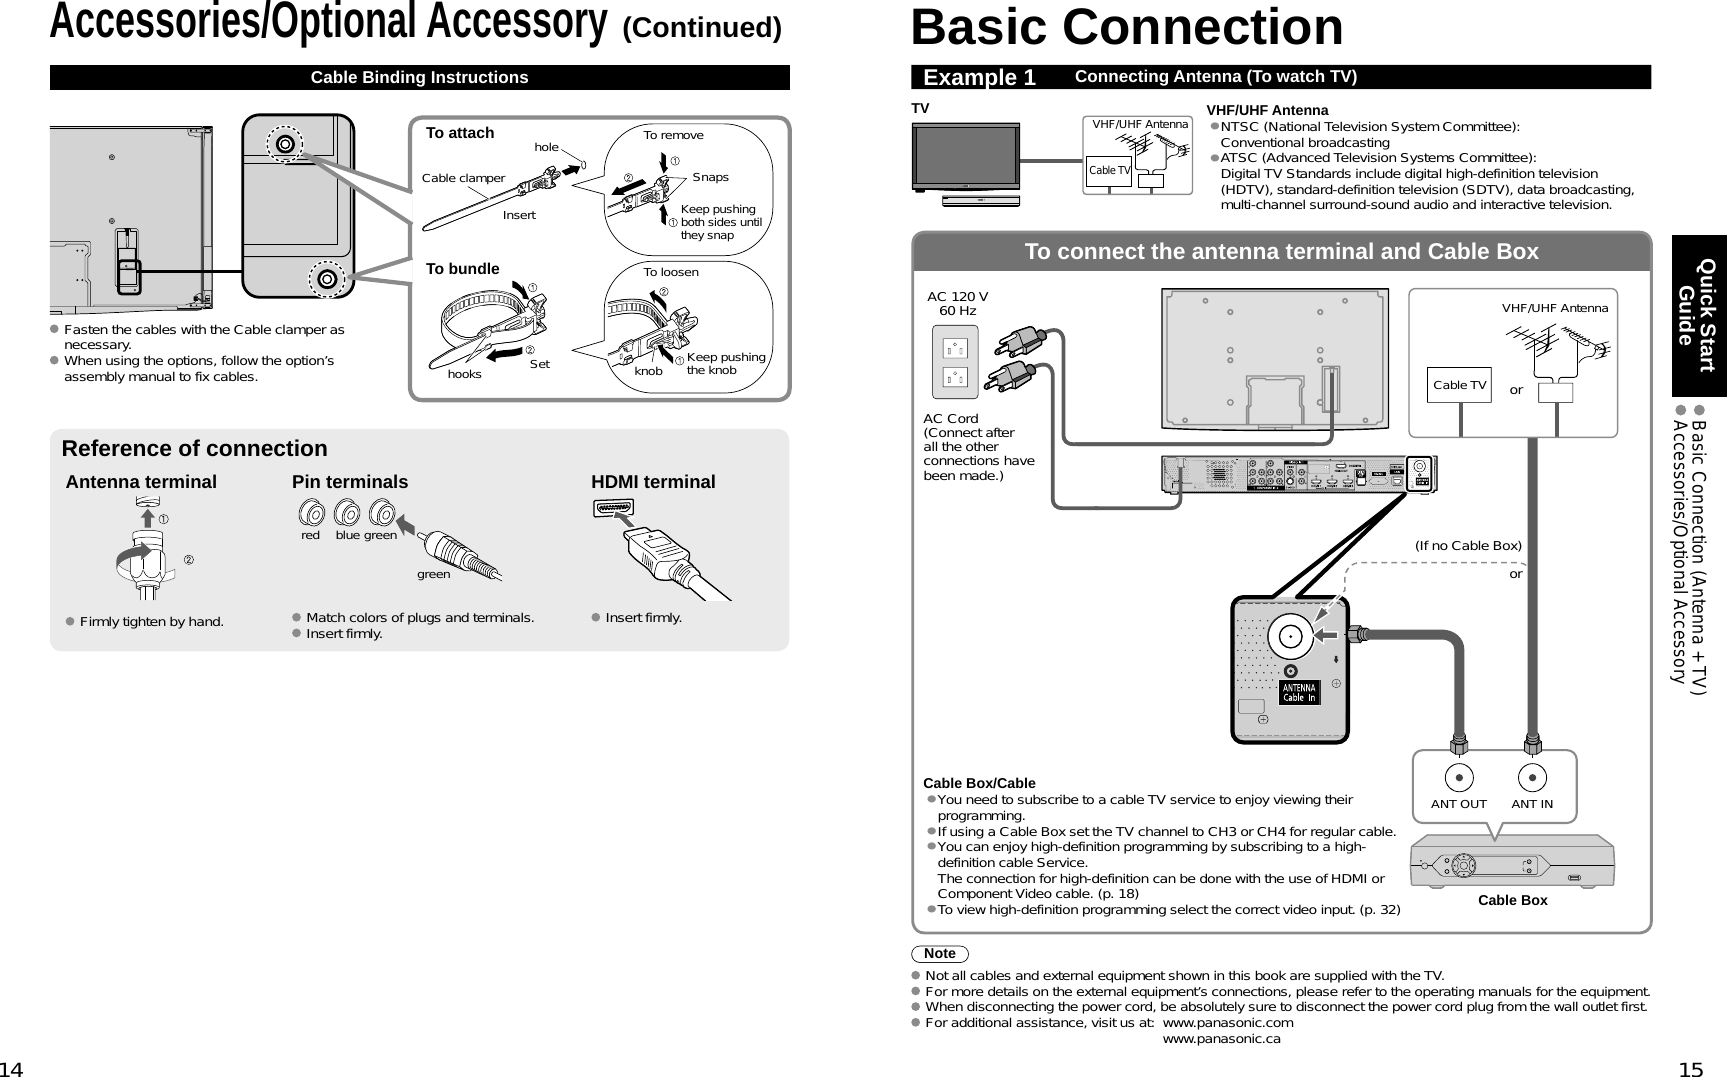 14 15Quick Start Guide  Basic Connection (Antenna + TV) Accessories/Optional AccessoryTo connect the antenna terminal and Cable BoxANT OUT ANT INBasic ConnectionNoteNot all cables and external equipment shown in this book are supplied with the TV. For more details on the external equipment’s connections, please refer to the operating manuals for the equipment. When disconnecting the power cord, be absolutely sure to disconnect the power cord plug from the wall outlet first. For additional assistance, visit us at:   www.panasonic.comwww.panasonic.caExample 1 Connecting Antenna (To watch TV)Cable TVVHF/UHF AntennaTV VHF/UHF Antenna•NTSC (National Television System Committee):Conventional broadcasting•ATSC (Advanced Television Systems Committee):Digital TV Standards include digital high-definition television (HDTV), standard-definition television (SDTV), data broadcasting, multi-channel surround-sound audio and interactive television.(If no Cable Box) AC Cord(Connect after all the other connections have been made.)Cable TVAC 120 V60 Hz VHF/UHF AntennaCable Box ororAccessories/Optional Accessory(Continued)Cable Binding InstructionsAntenna terminal Pin terminals HDMI terminalgreenblueredgreen Firmly tighten by hand.  Match colors of plugs and terminals. Insert firmly.  Insert firmly.Reference of connectionCable Box/Cable•You need to subscribe to a cable TV service to enjoy viewing their programming.•If using a Cable Box set the TV channel to CH3 or CH4 for regular cable.•You can enjoy high-definition programming by subscribing to a high-definition cable Service. The connection for high-definition can be done with the use of HDMI or Component Video cable. (p. 18)•To view high-definition programming select the correct video input. (p. 32)To attach holeInsertTo bundleTo removeTo loosenKeep pushing both sides until they snap SnapsSethooks knob Keep pushing the knobCable clamper Fasten the cables with the Cable clamper as necessary. When using the options, follow the option’s assembly manual to fix cables.